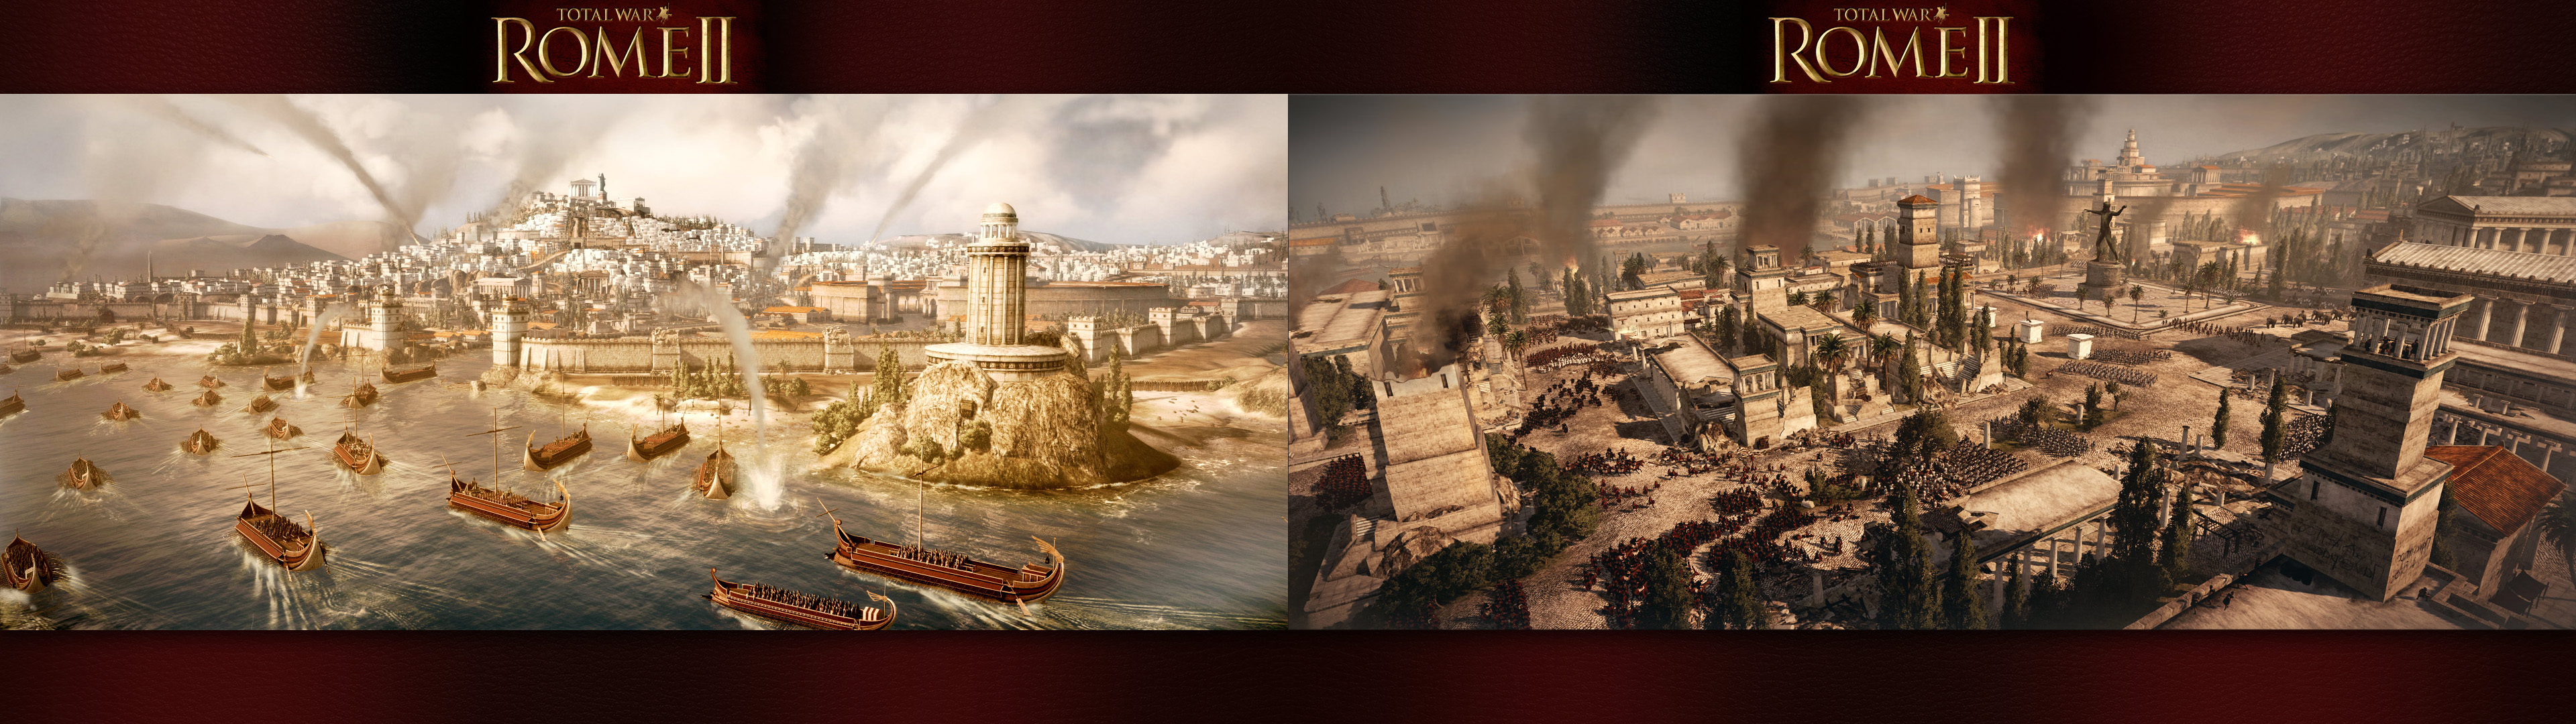 Rome total war wallpapers by garsondee on